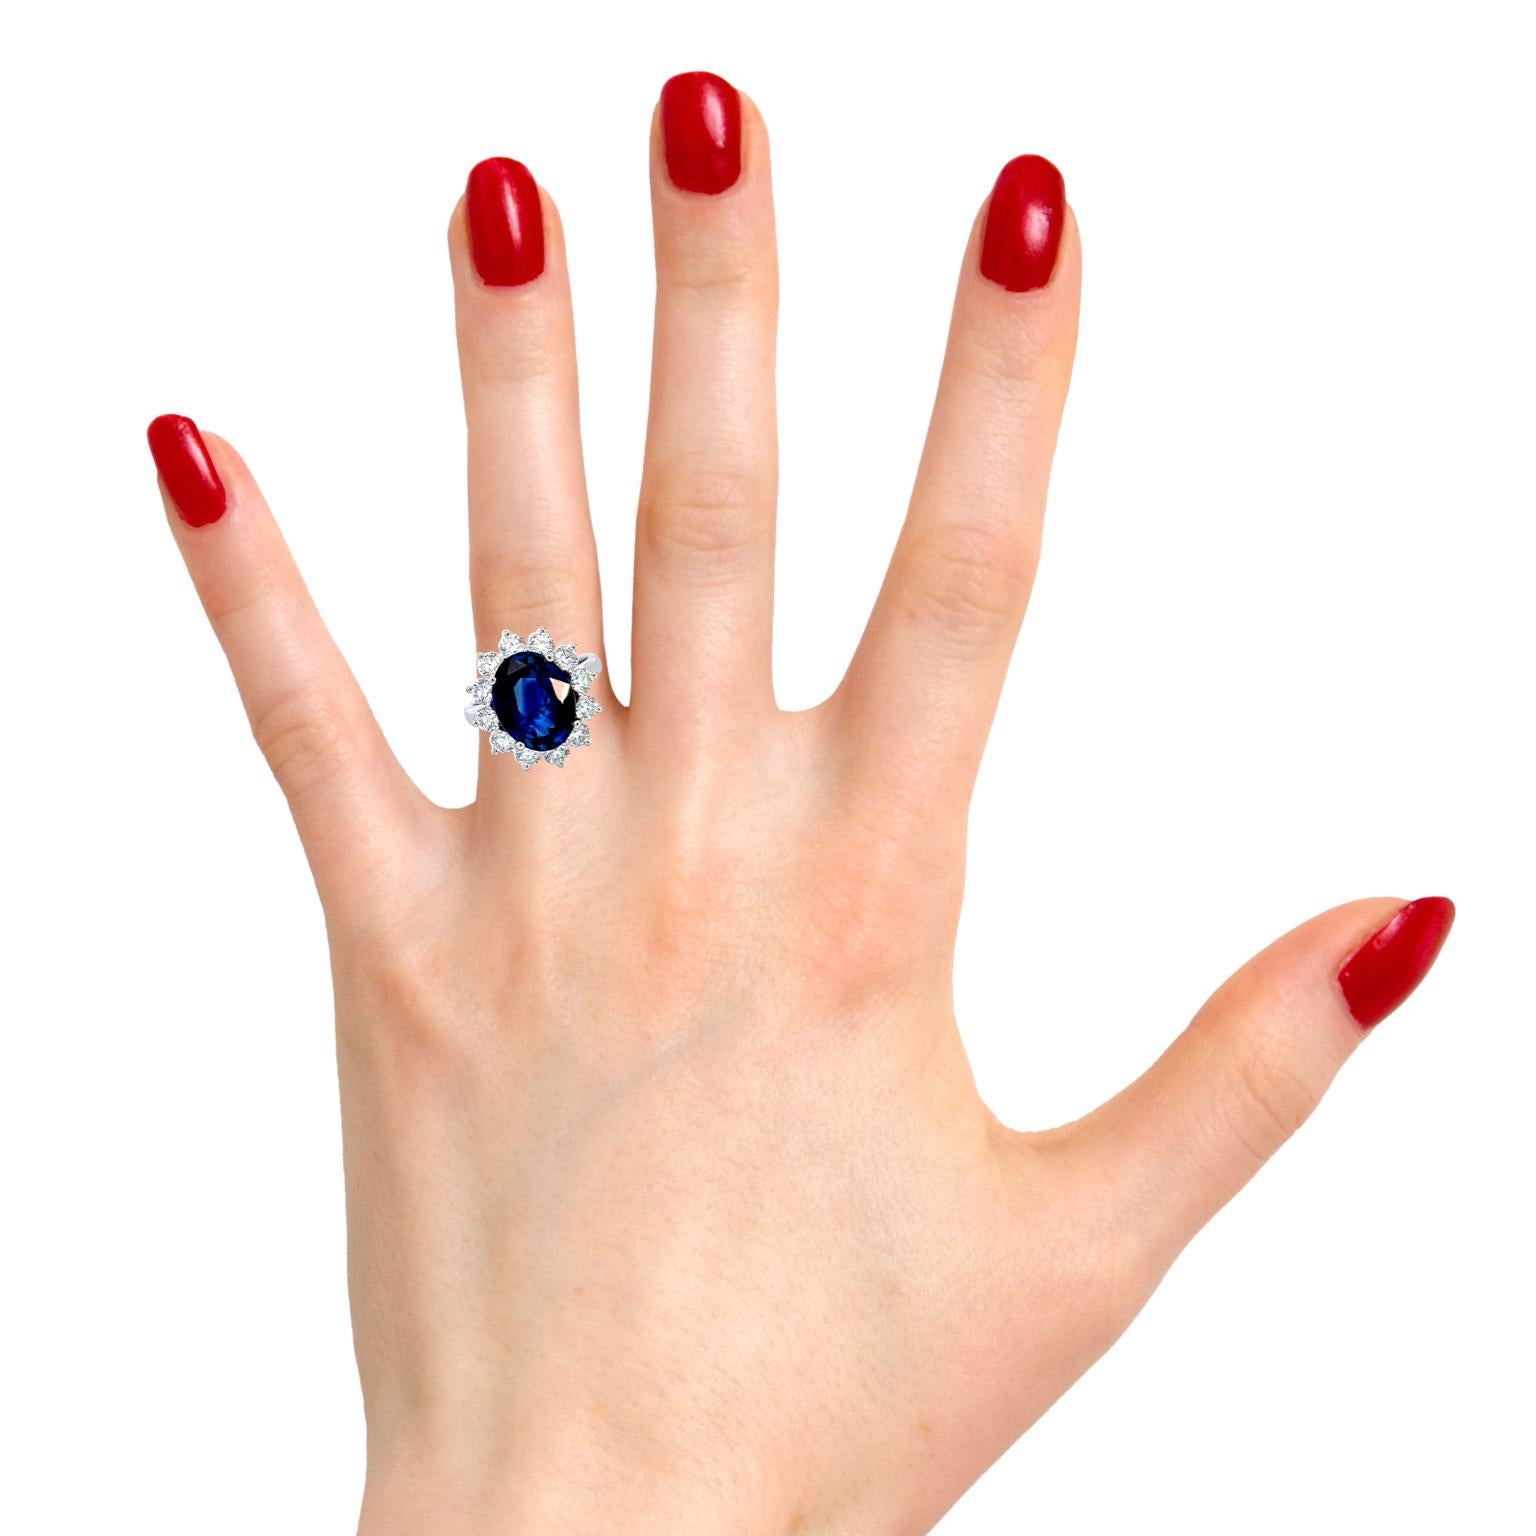 Indulge in the captivating allure of this 18k white gold Ceylon sapphire ring, showcasing a magnificent 12x10mm oval gemstone of vivid blue hue. The star of this masterpiece is a breathtaking 6.46-carat Ceylon sapphire, celebrated for its